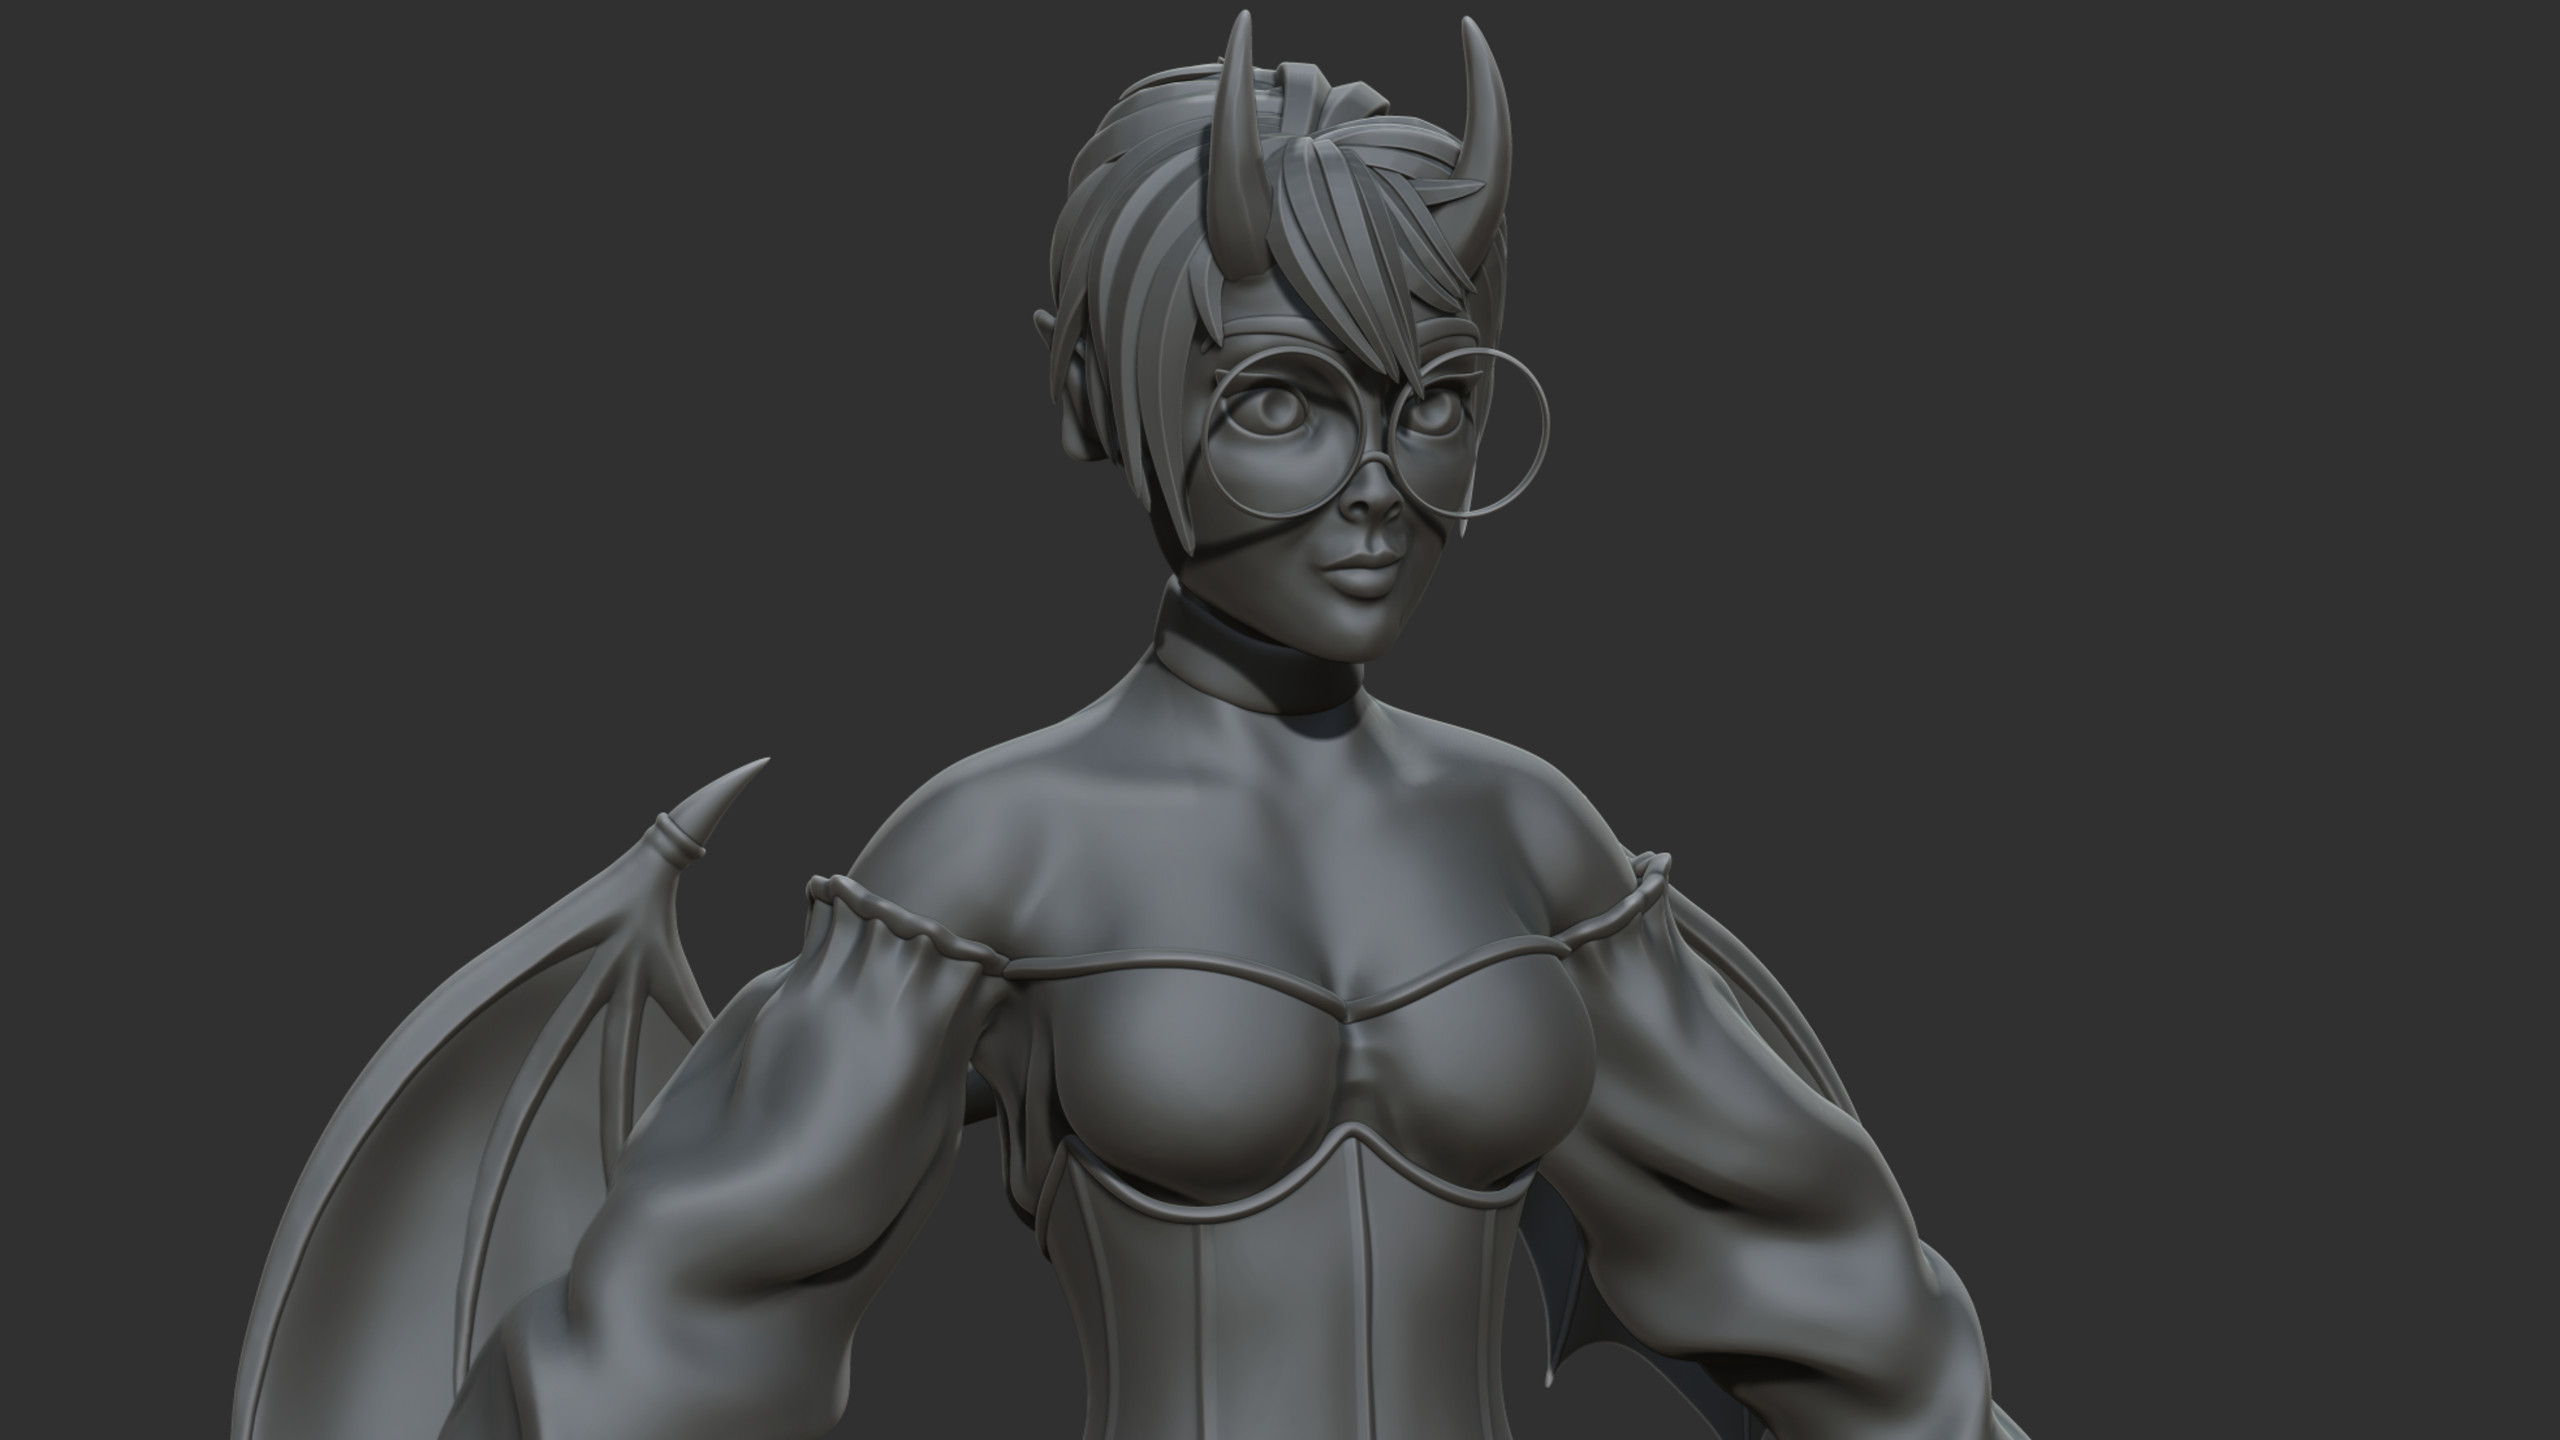 Close up also captured from Zbrush